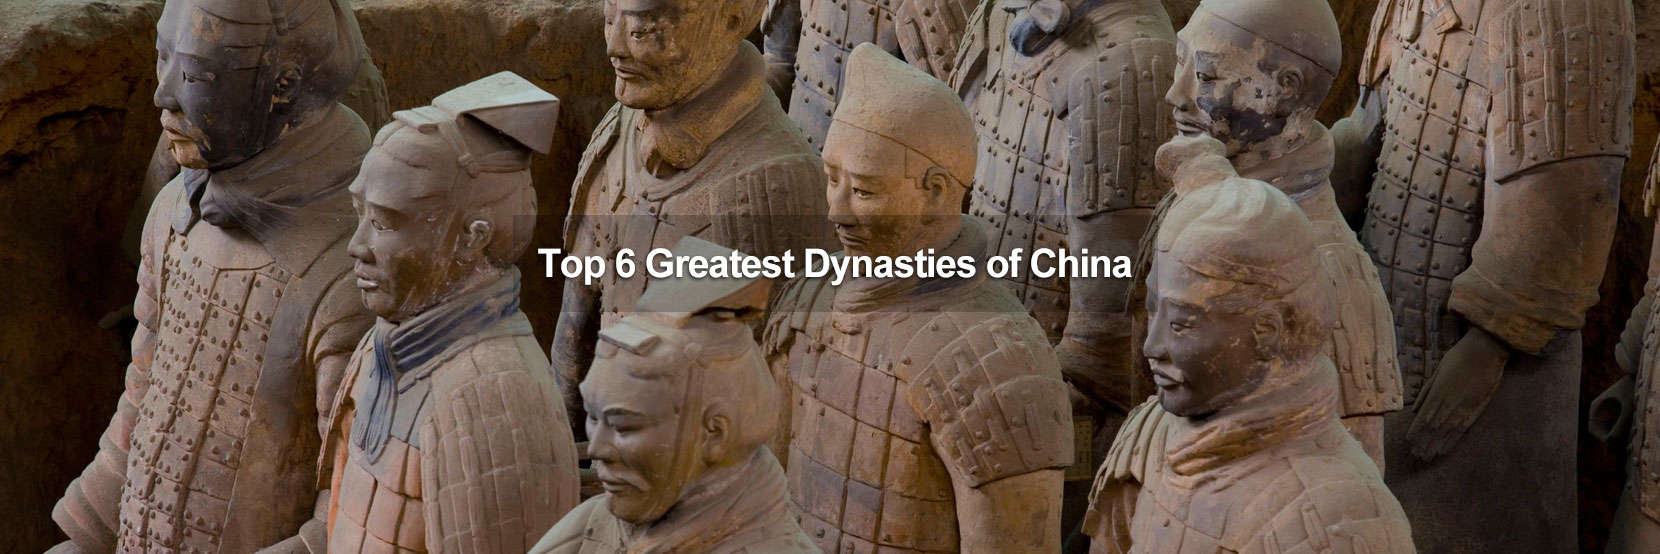 Top 6 Greatest Dynasties of China